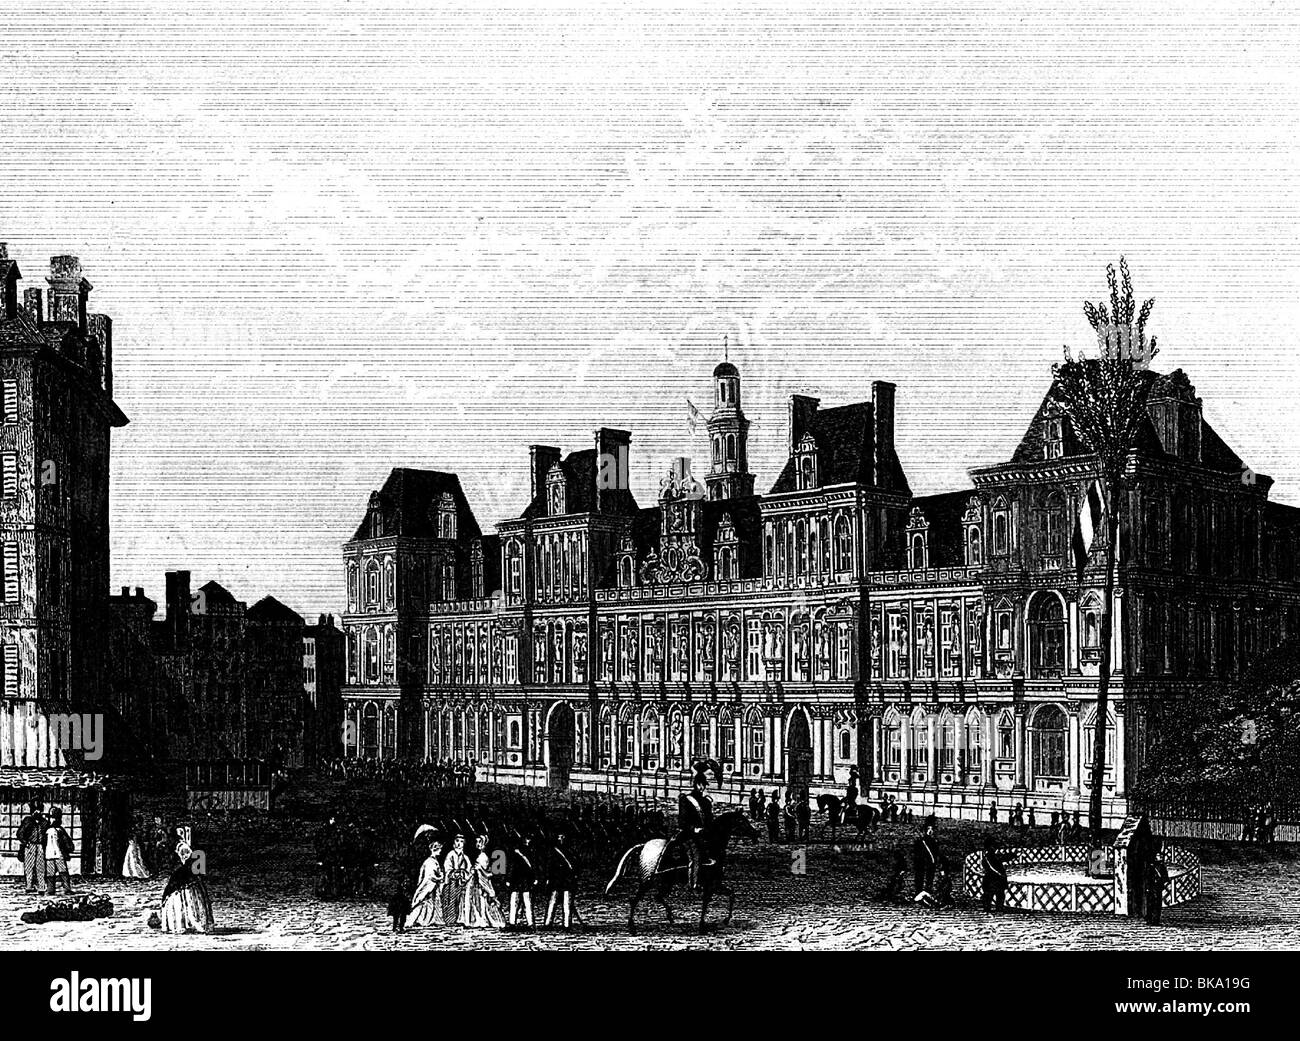 geography / travel, France, Paris, Hotel de Ville (city hall), steel engraving by W. S. Barnard, circa 1st half of 19th century, historic, historical, Western Europe, building, buildings, architecture, exterior view, people, Stock Photo